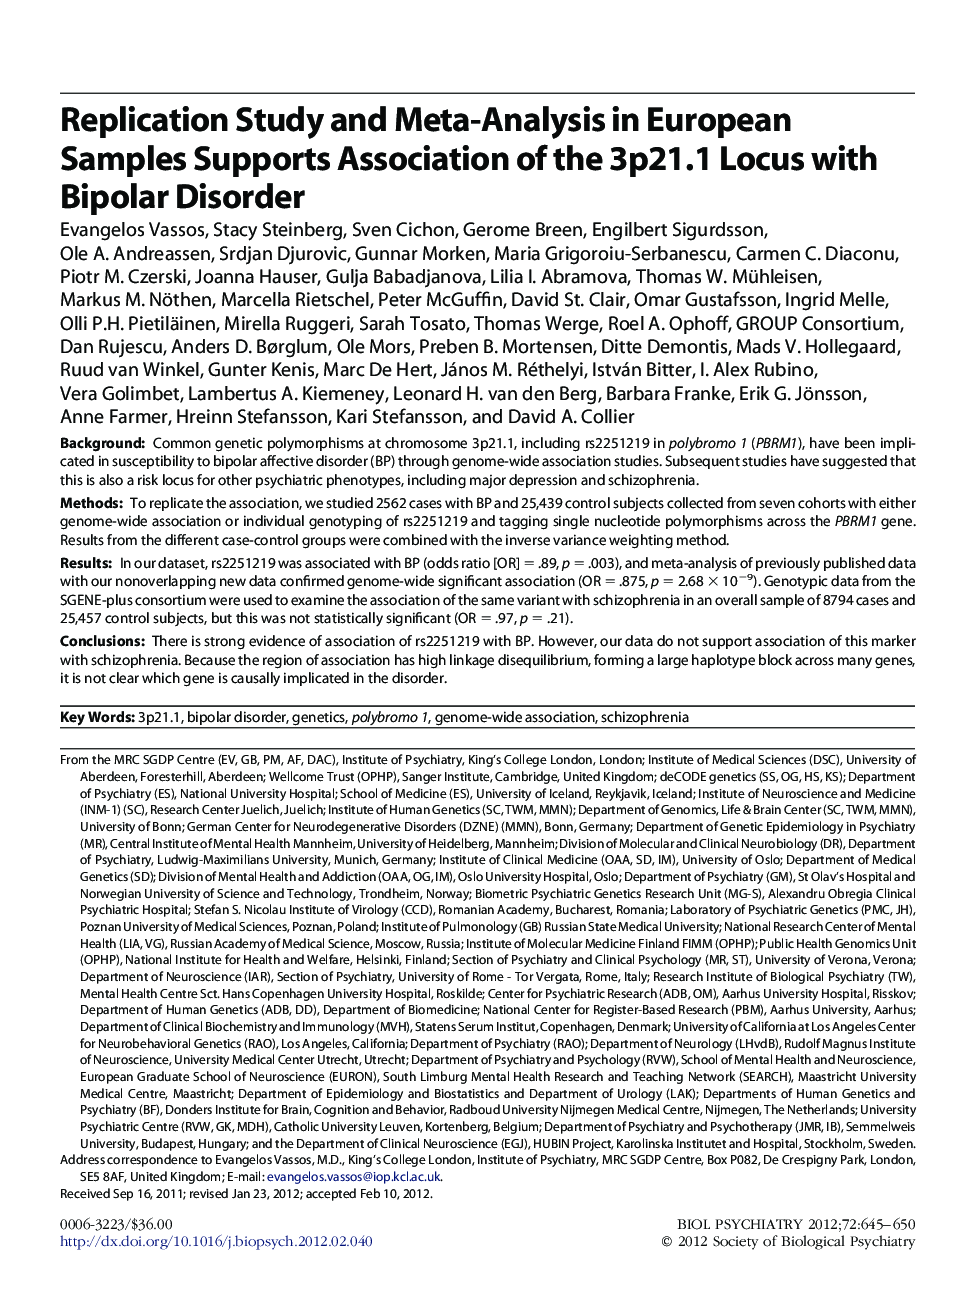 Replication Study and Meta-Analysis in European Samples Supports Association of the 3p21.1 Locus with Bipolar Disorder